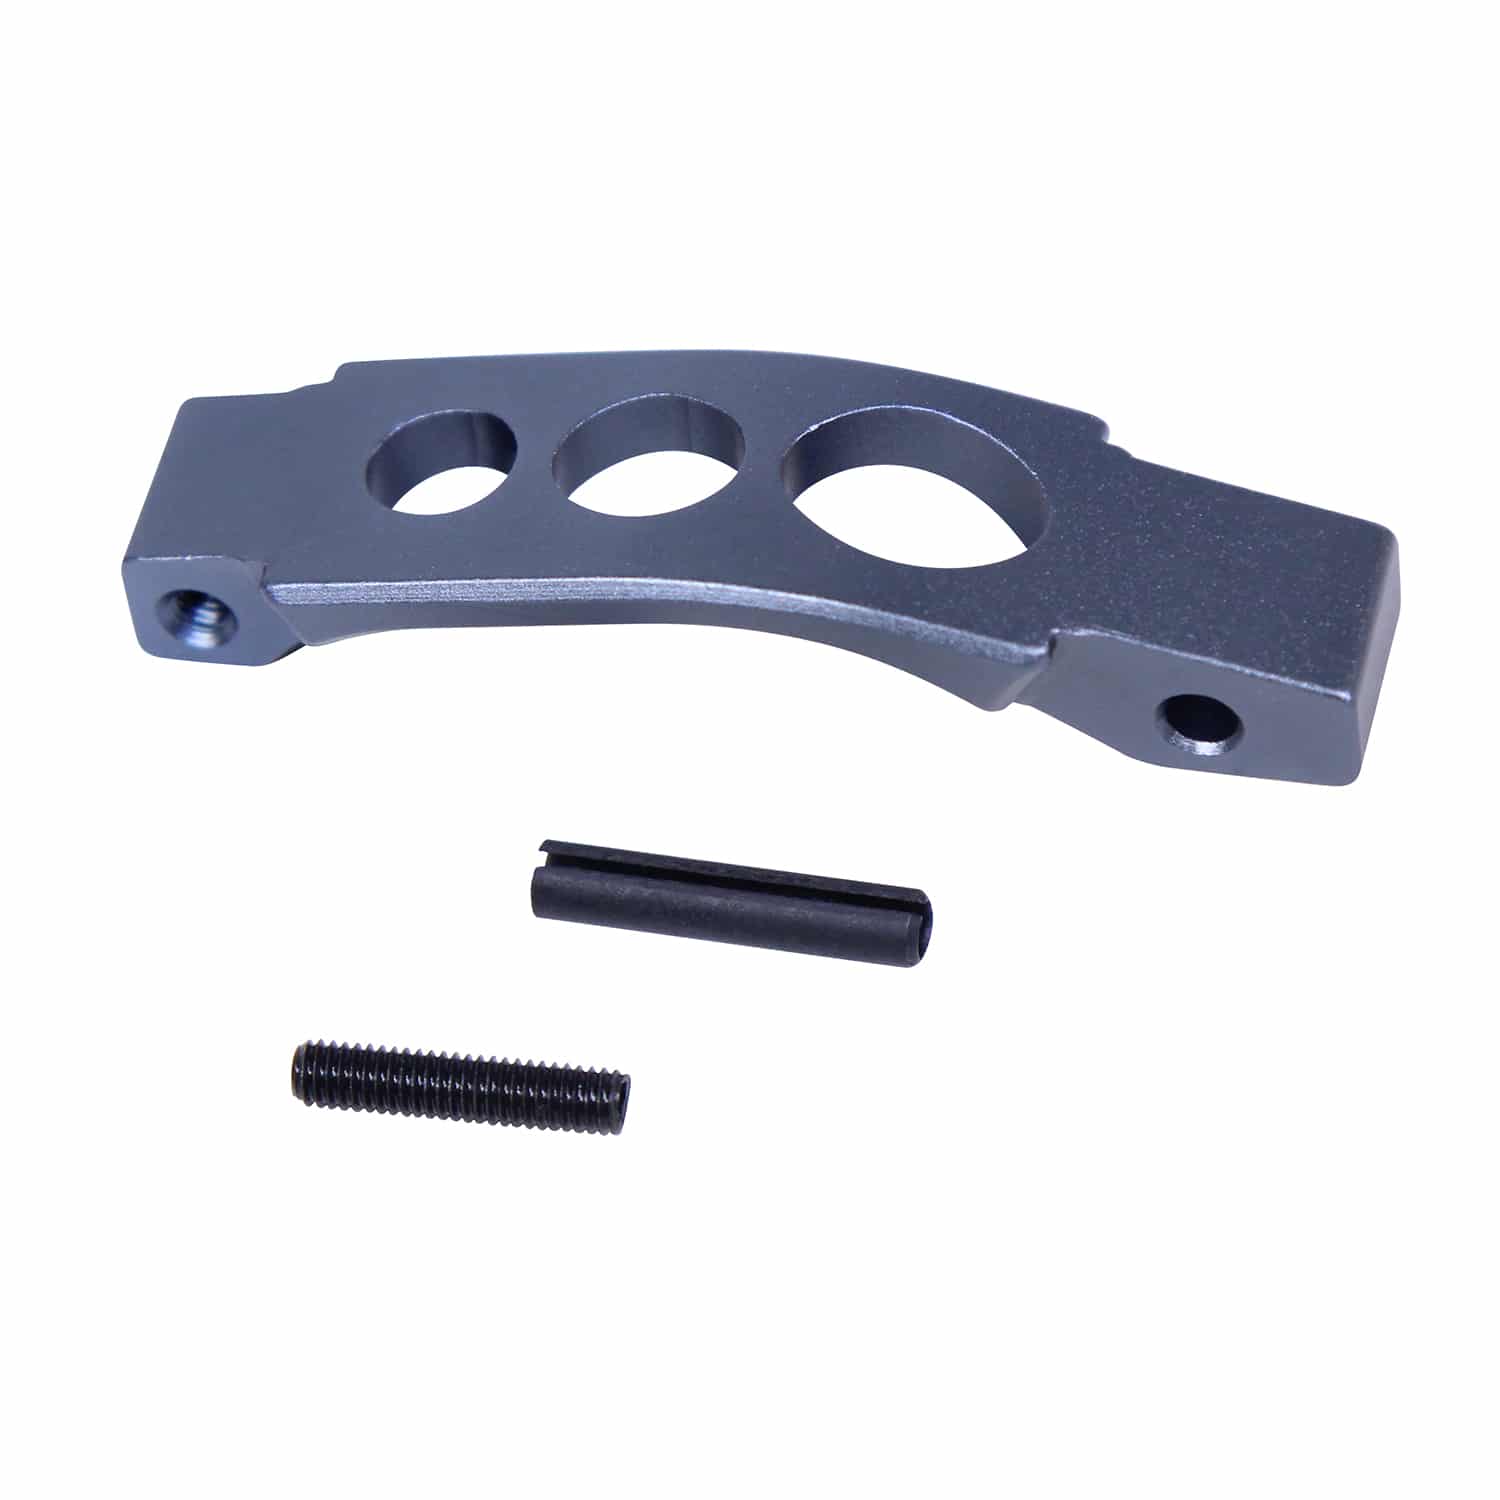 AR-15 Extended Trigger Guard in Anodized Grey